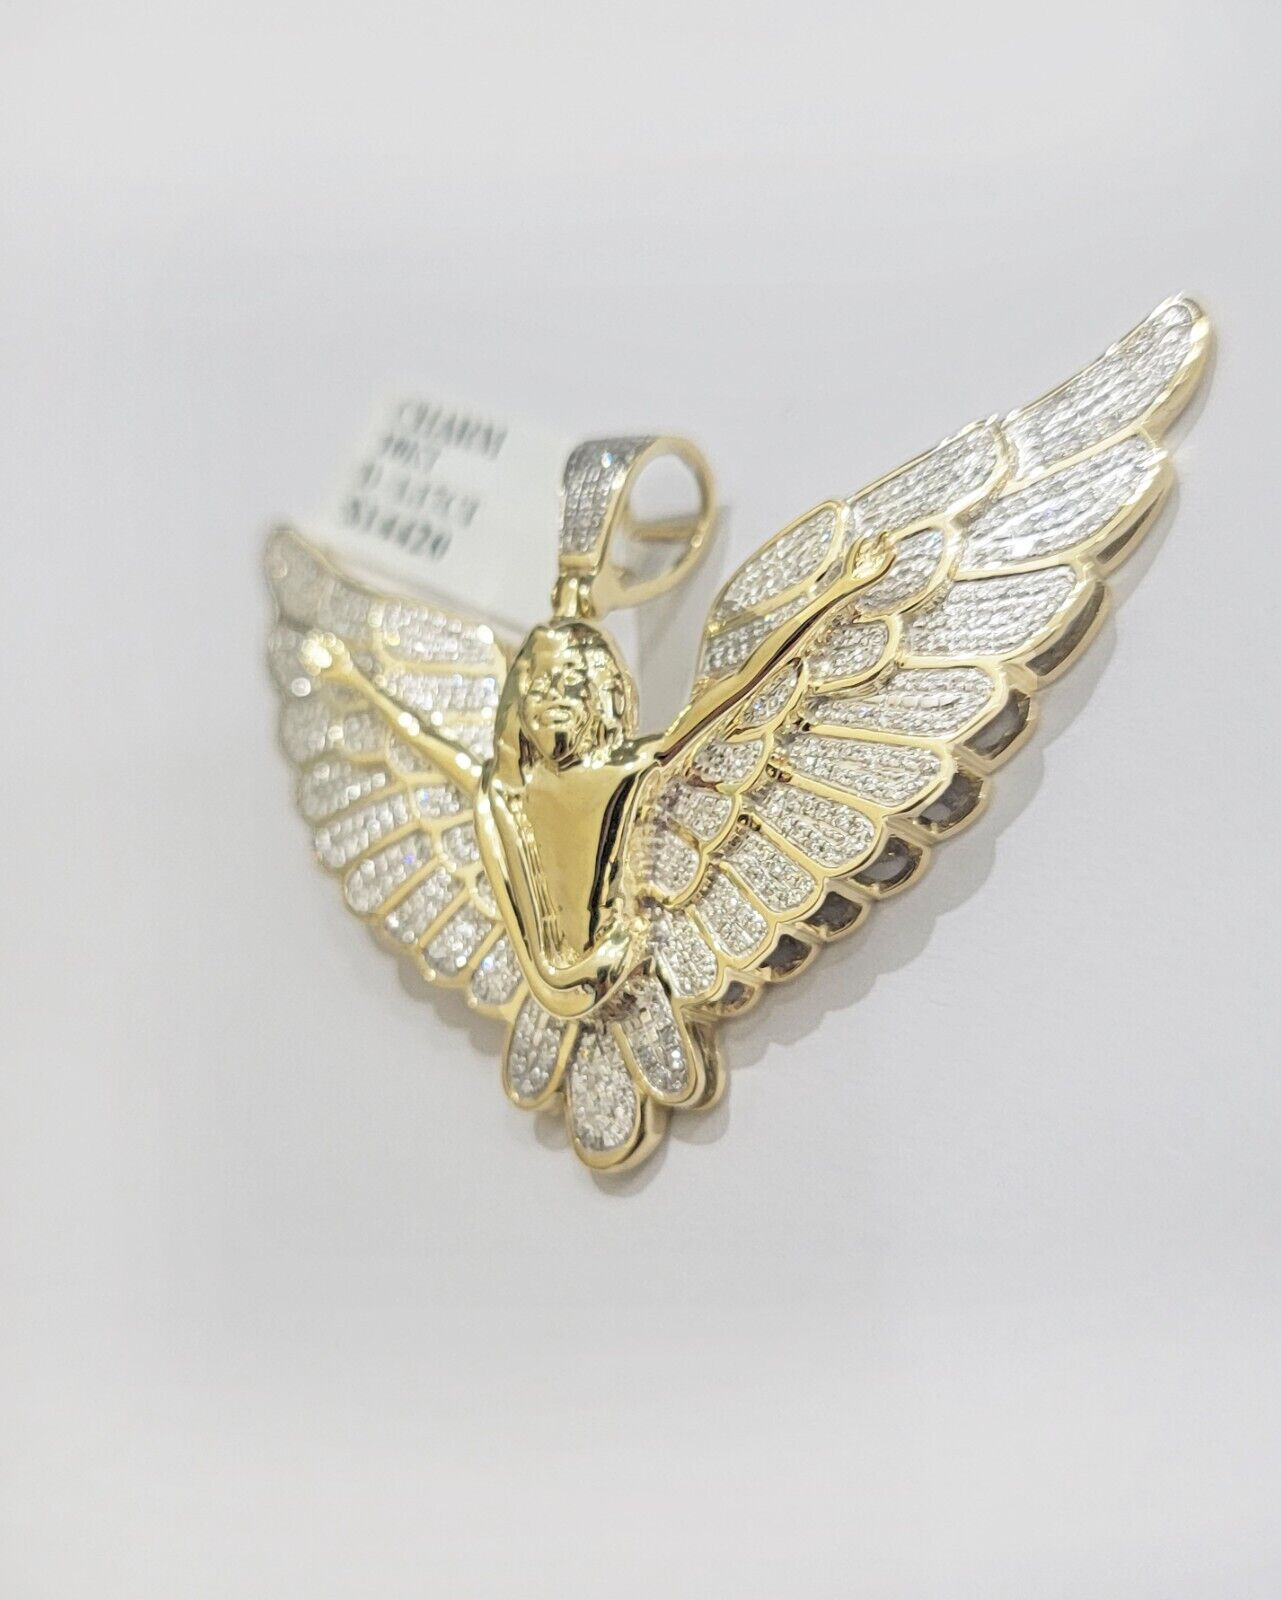 Real Gold Diamond Angel Wing Charm Pendant 10k yellow Gold 1.17 CT Mens 1.5 Inch